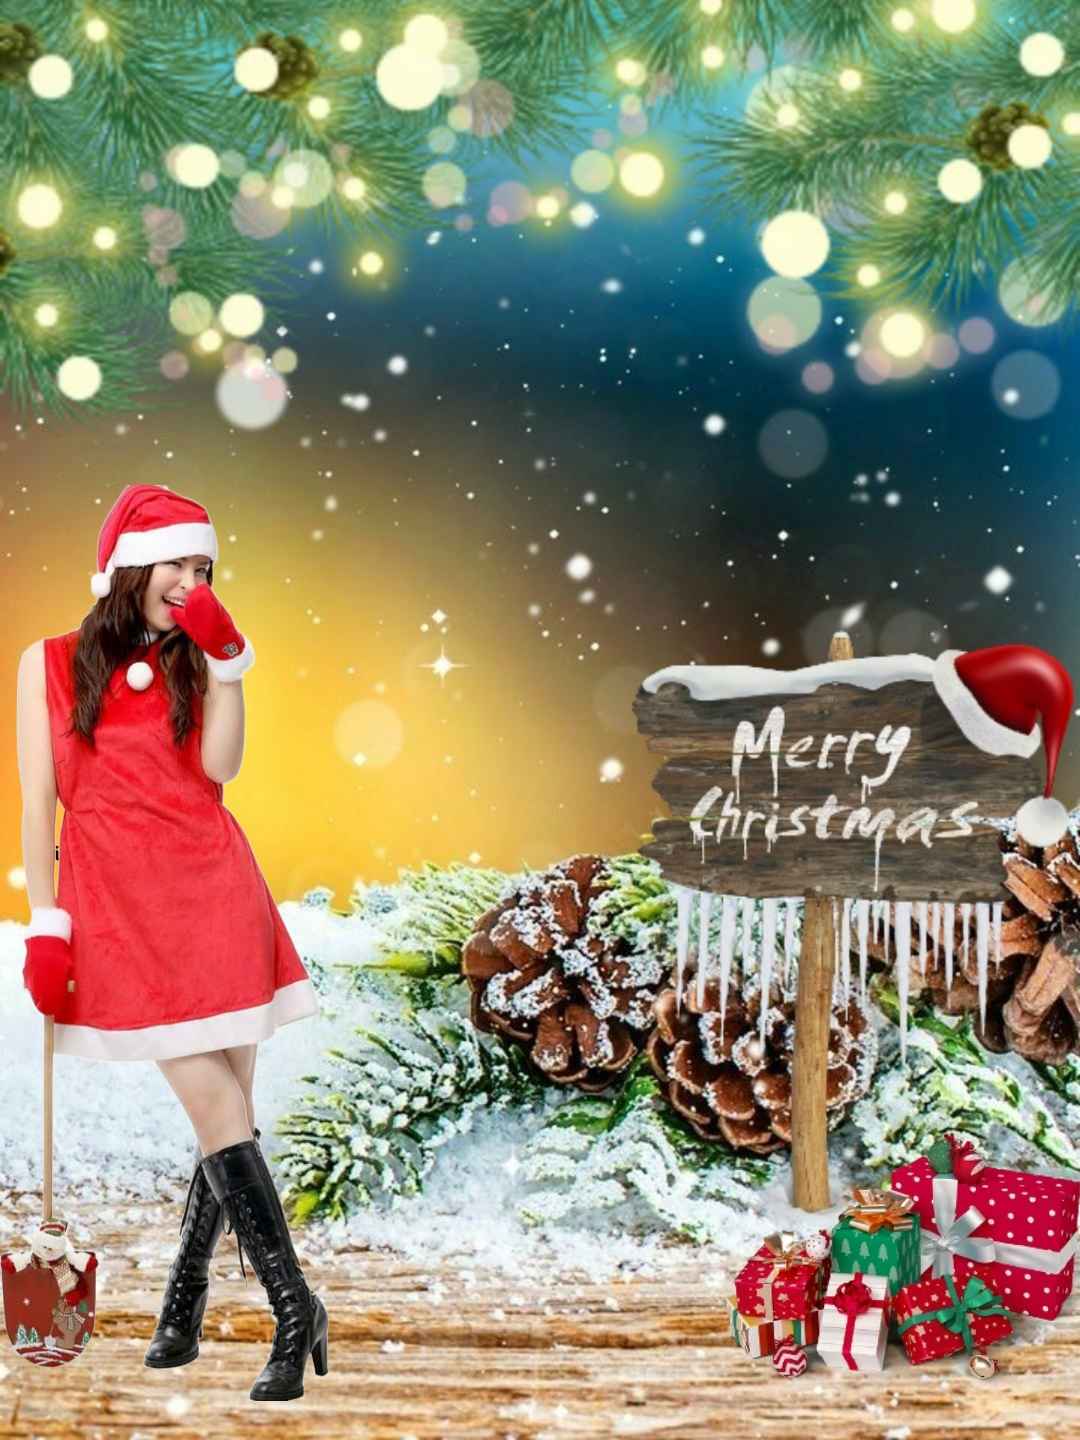 Christmas HD Editing Background With Girl